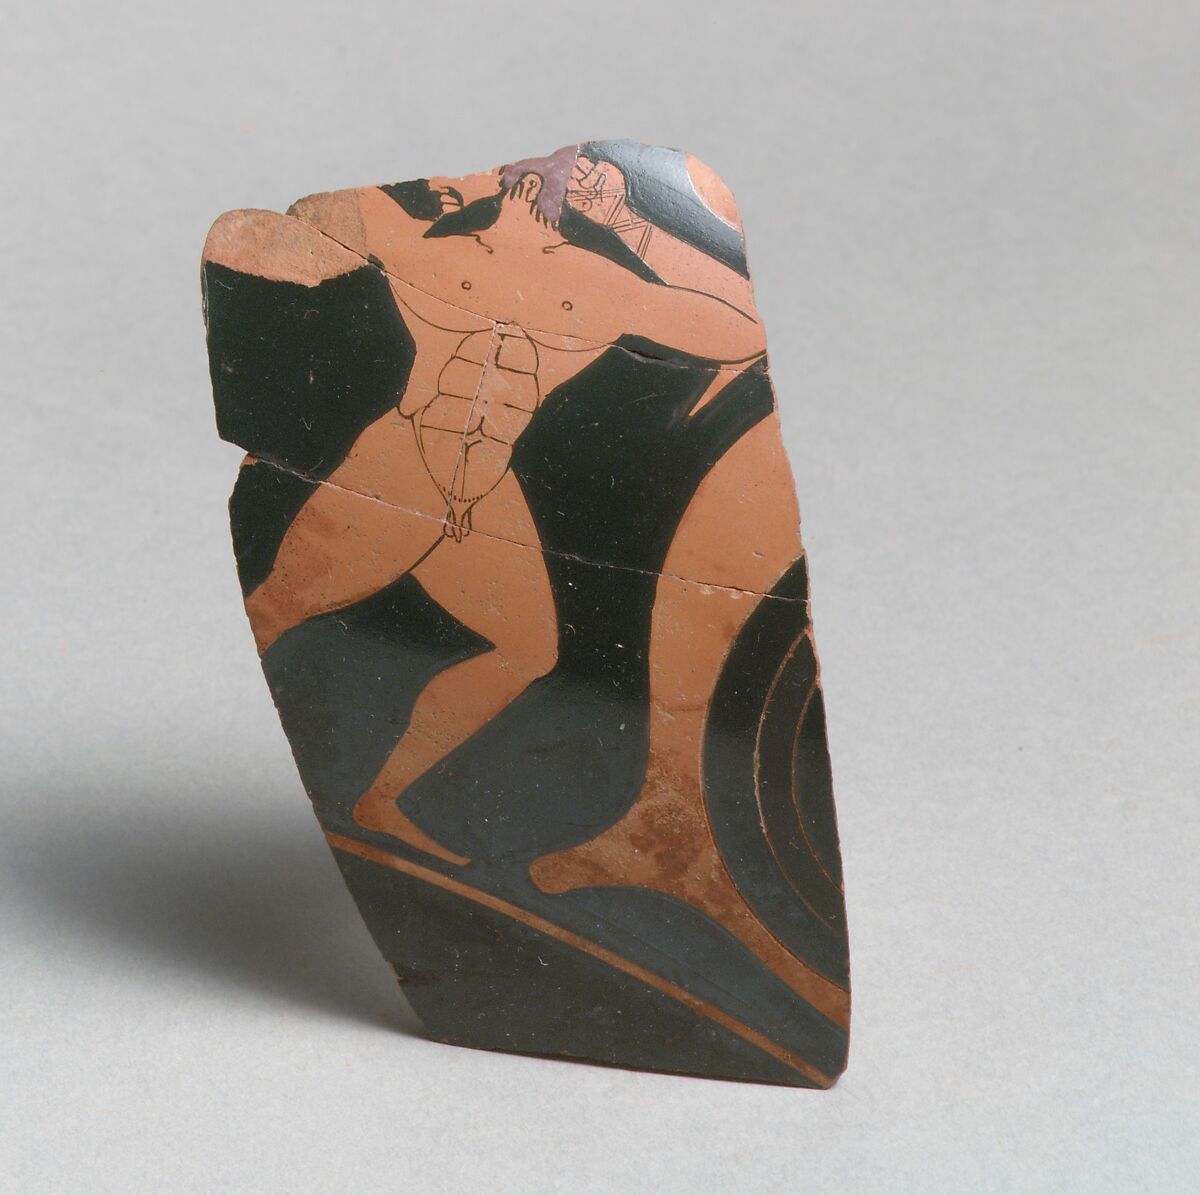 Fragment of a terracotta kylix: eye-cup  (drinking cup), Attributed to the Hischylos Painter, Terracotta, Greek, Attic 